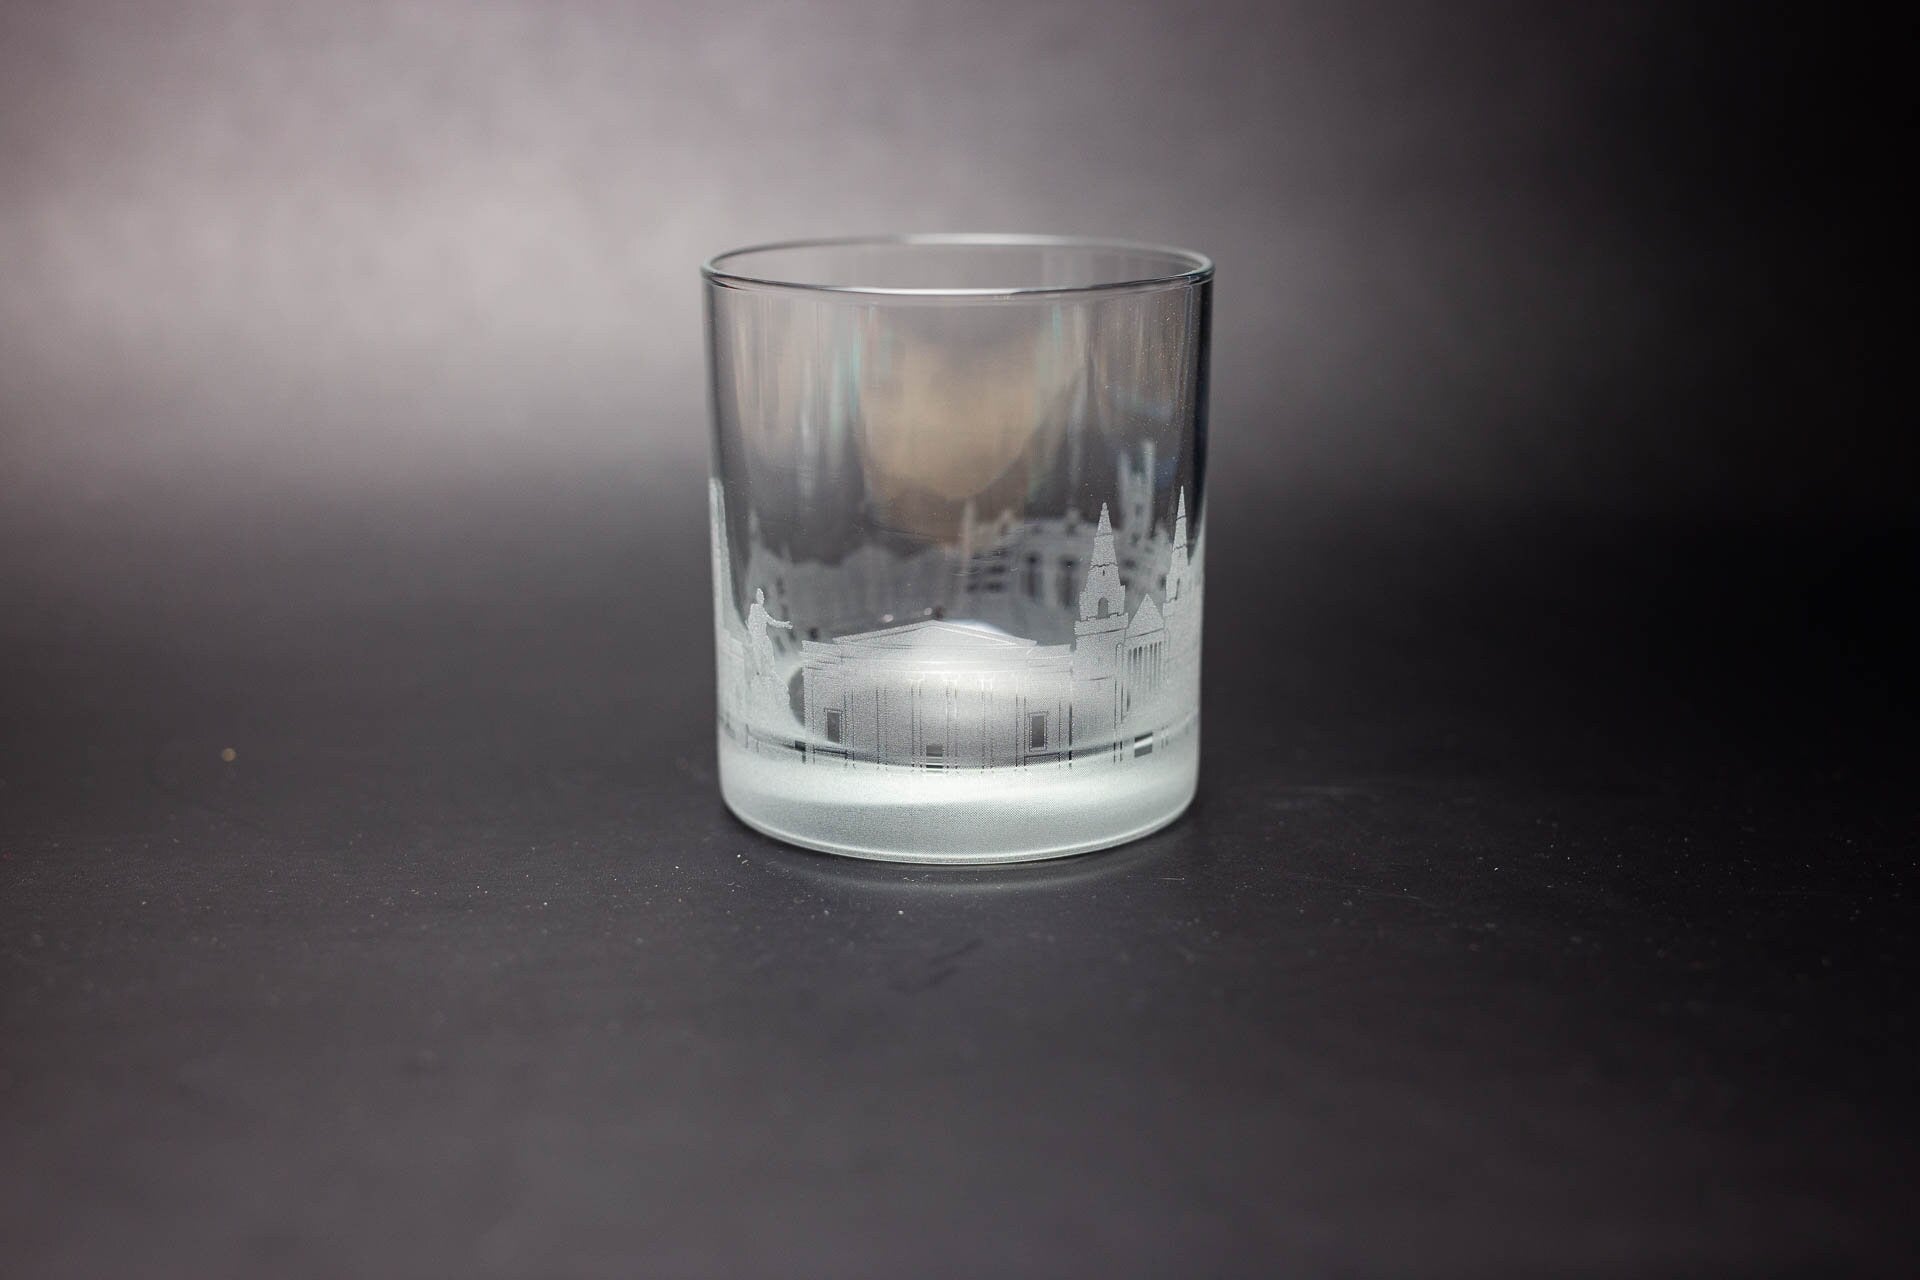 Aberdeen Skyline Rocks Glass/Old Fashioned Glass/ Whiskey Glass Tumbler/ Cocktail Glass/ Tequila Glass Etched Gift - Panoramic City Design - Urban and Etched